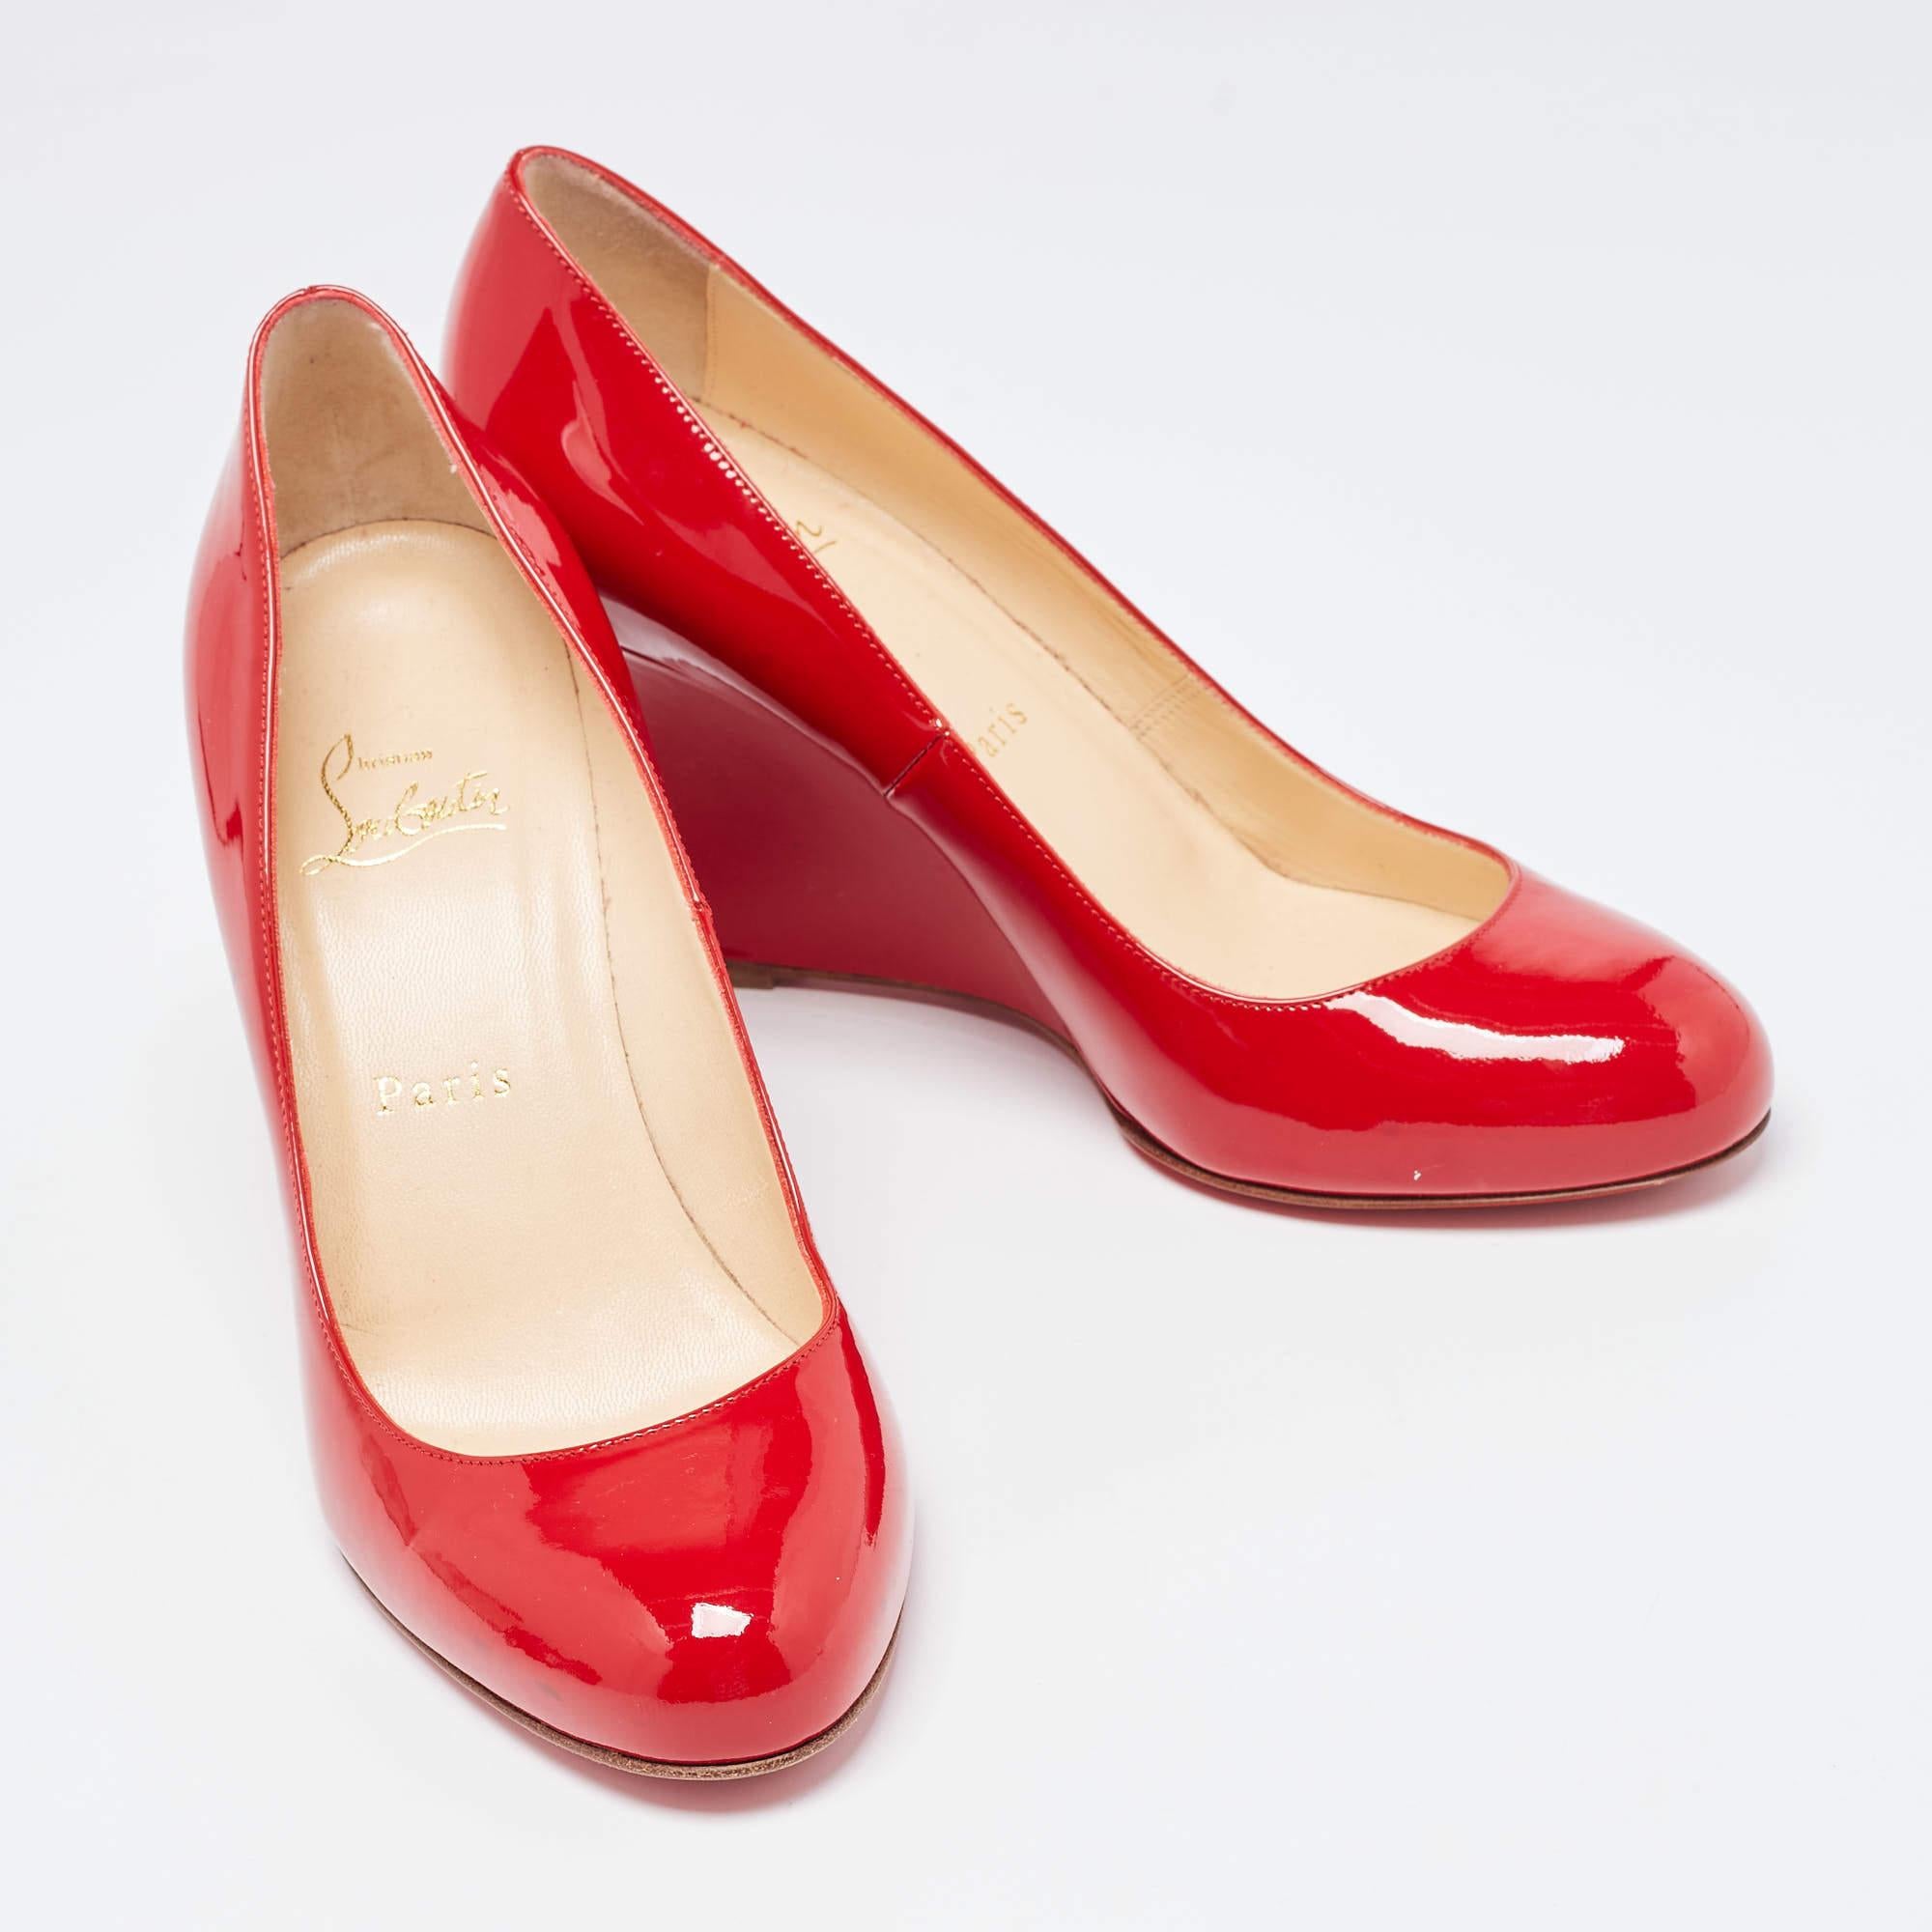 Christian Louboutin Red Patent Leather Ron Ron Wedge Pumps Size 38.5 For Sale 1